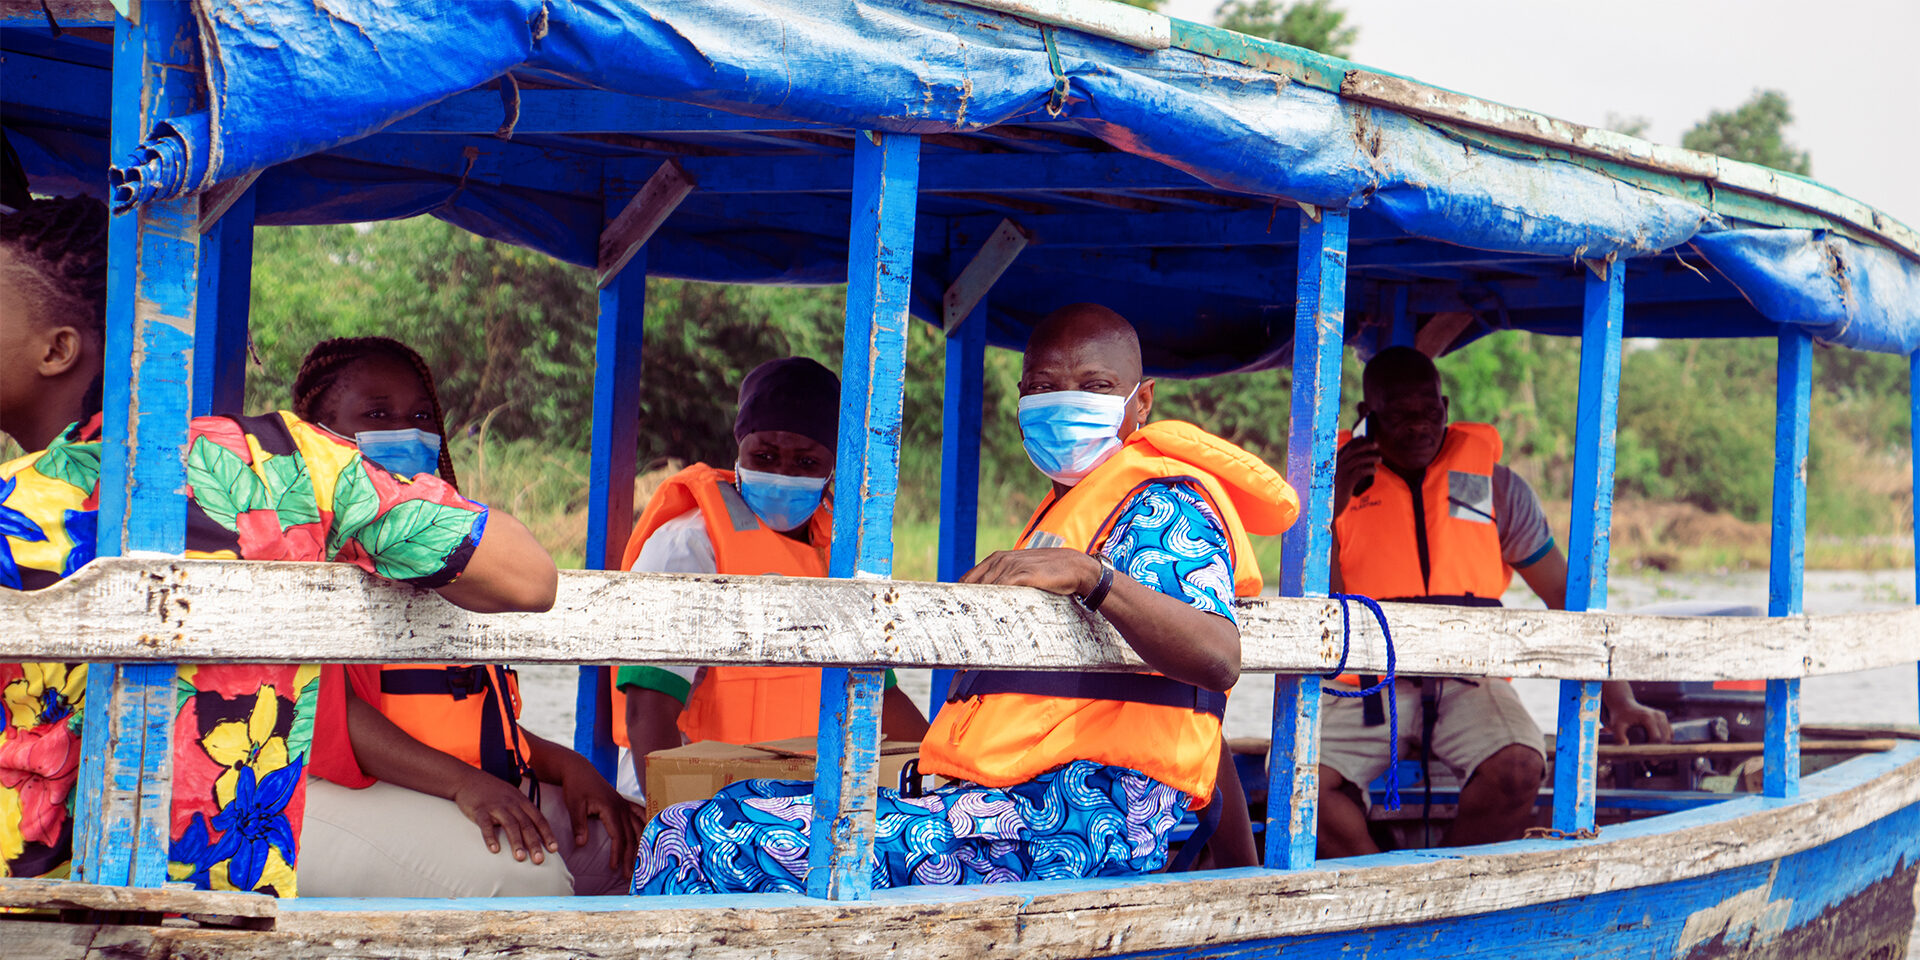 Several people riding in a blue wooden boat.